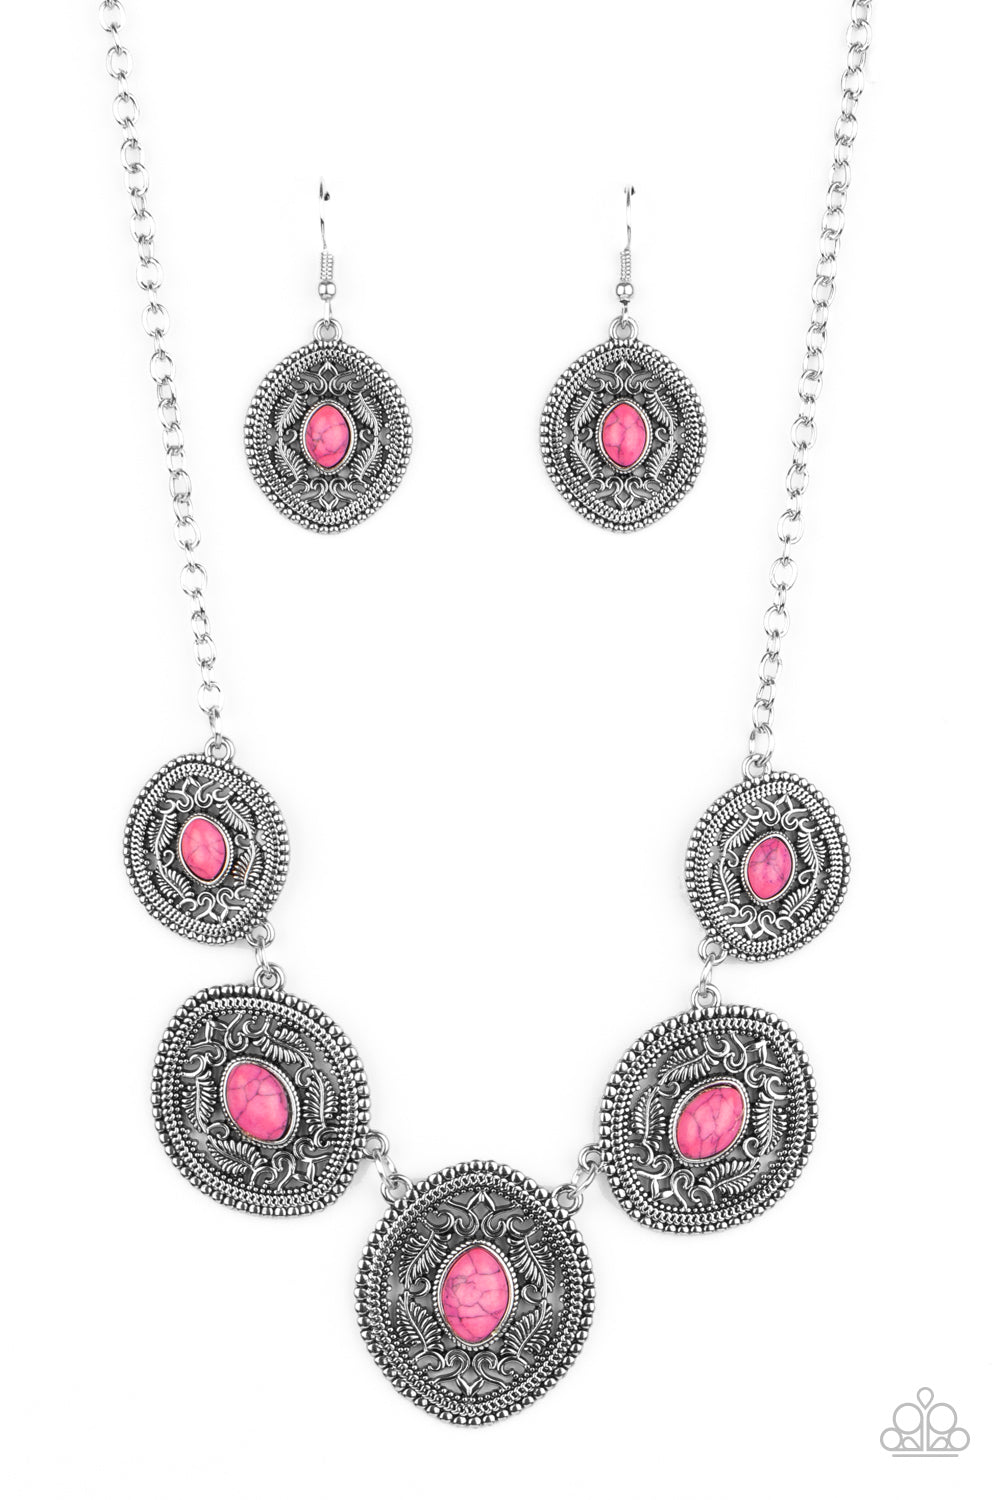 Paparazzi necklace with a A dainty pink stone with dot centers of leafy silver filigree filled frames that delicately connect below the collar, creating a colorfully earthy look.